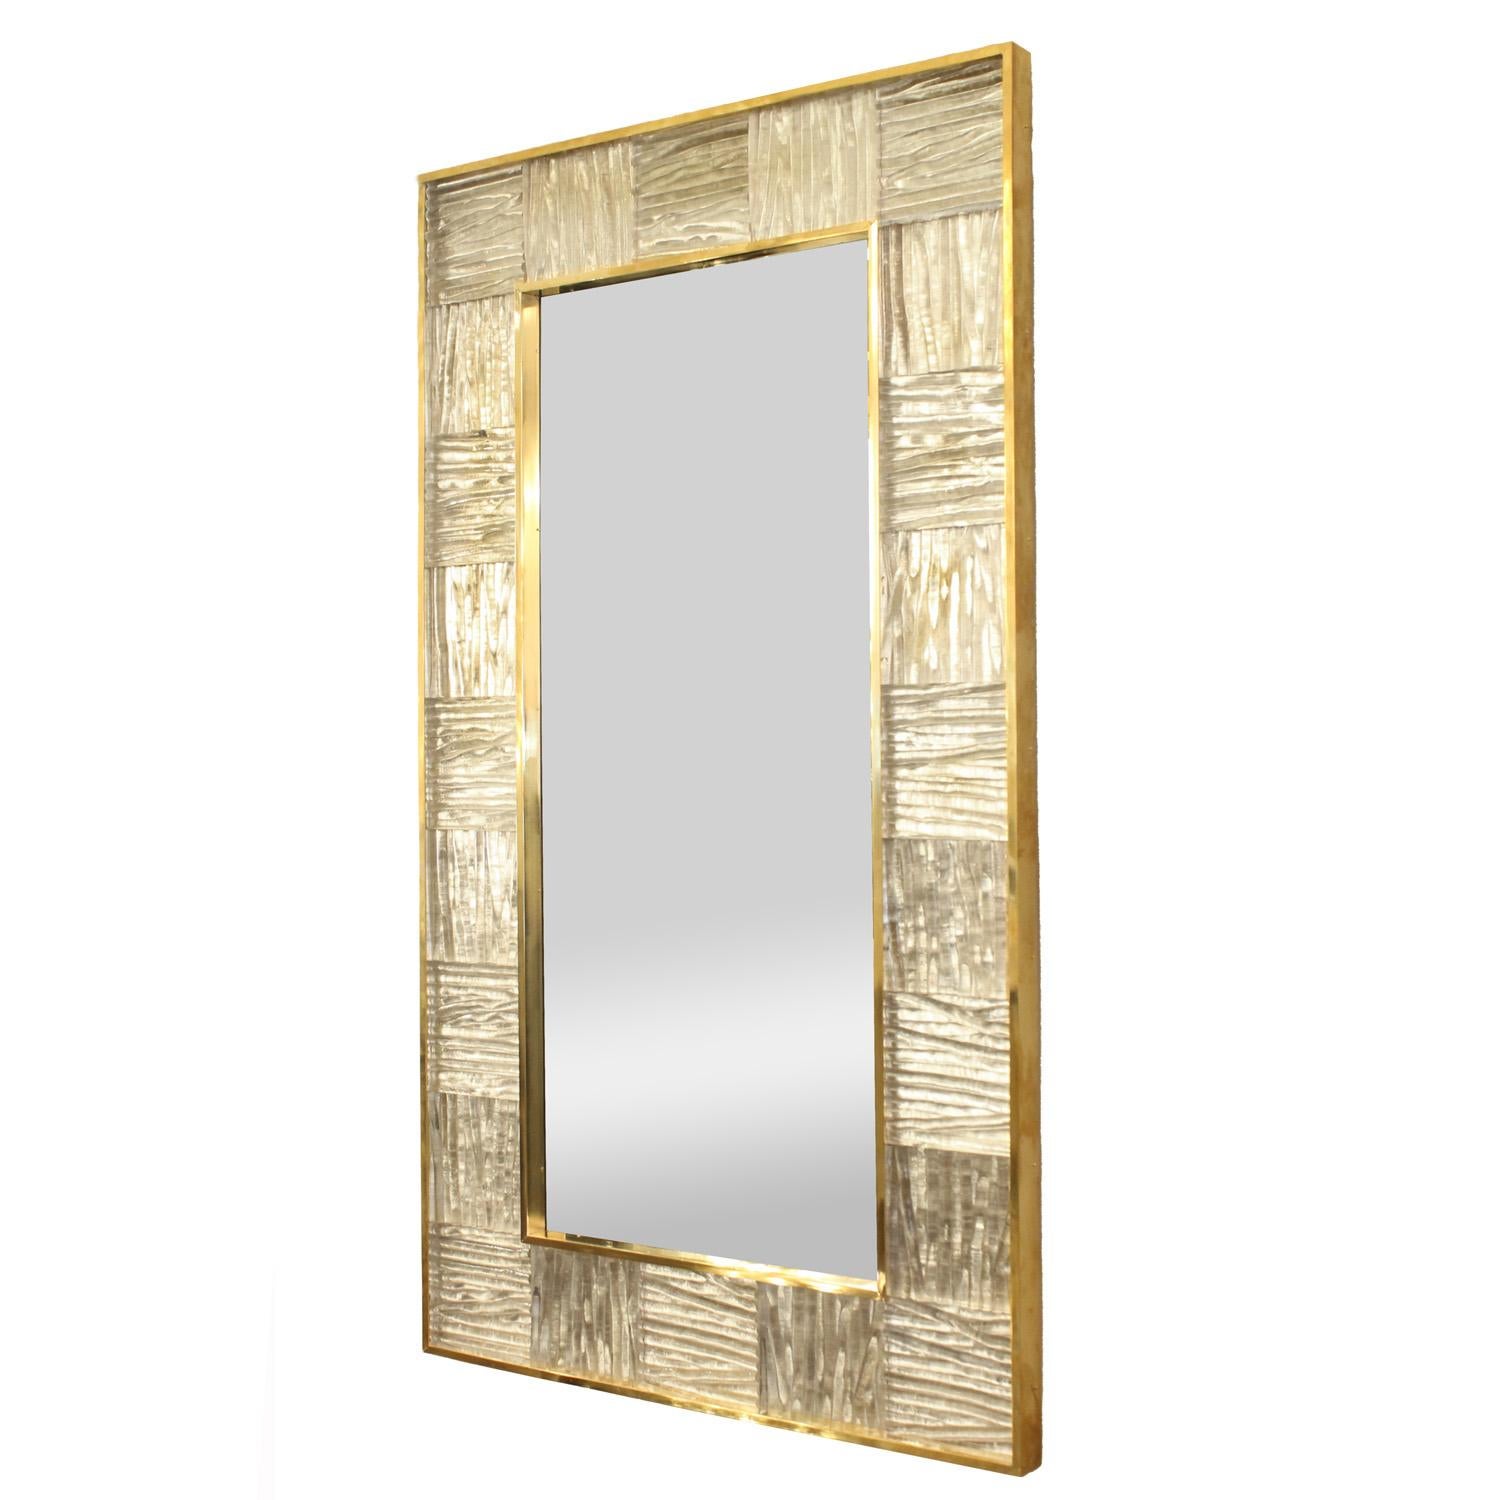 Hand crafted Murano glass square tile and brass framed mirror. Italy.

This mirror is currently available as shown in our NYC showroom.
Custom dimensions available. Art glass available in additional colors. Lead times 5-6 weeks. Please inquire with